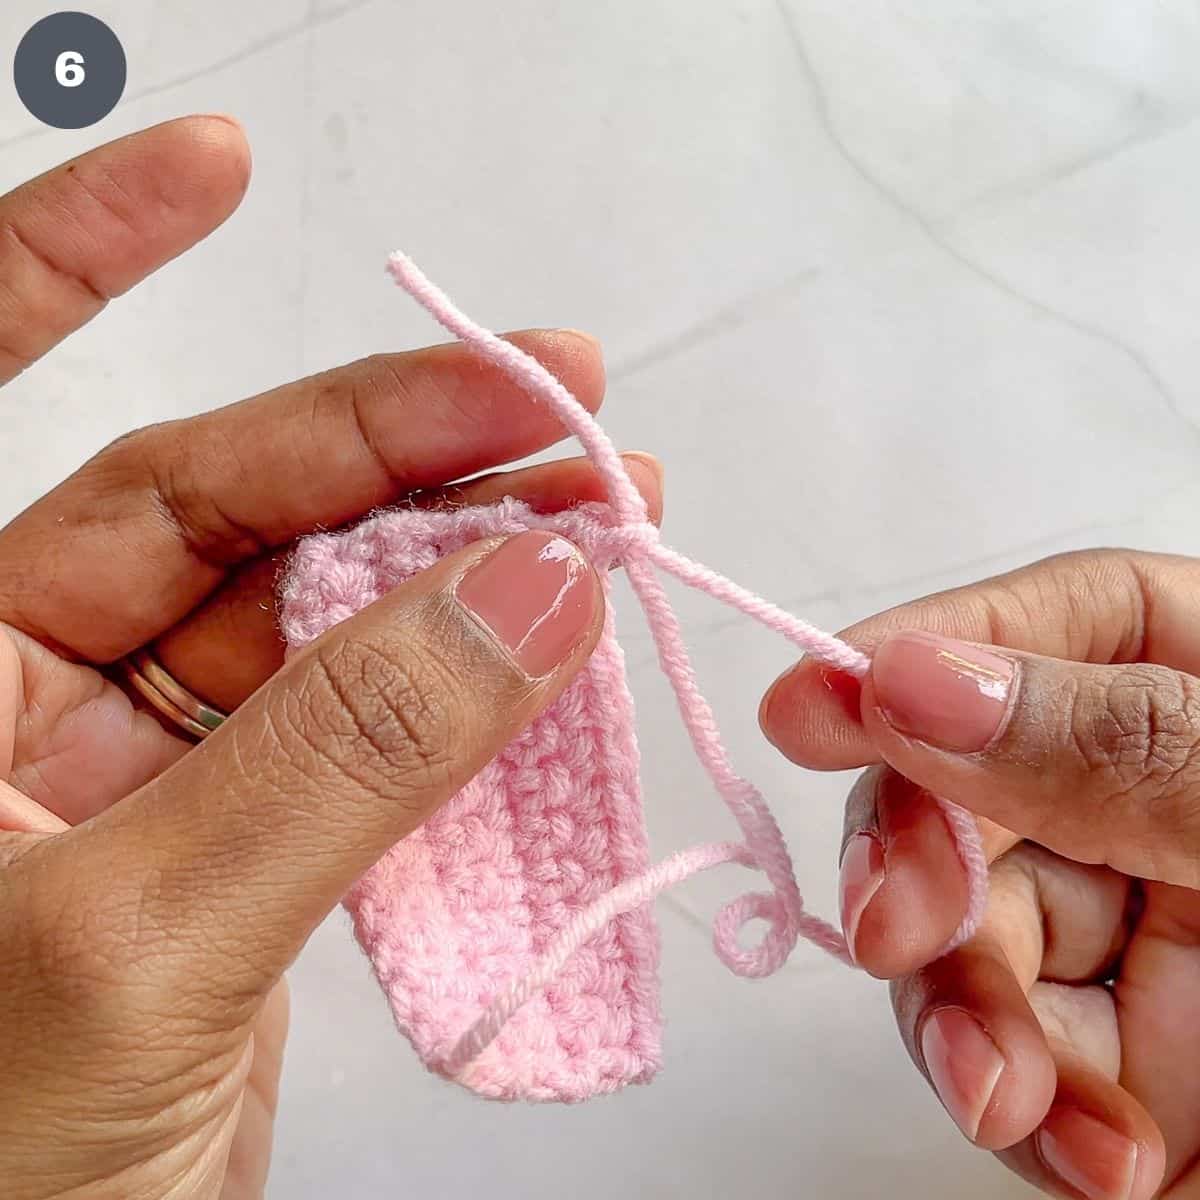 Pulling a pink crochet yarn to fasten stiches.